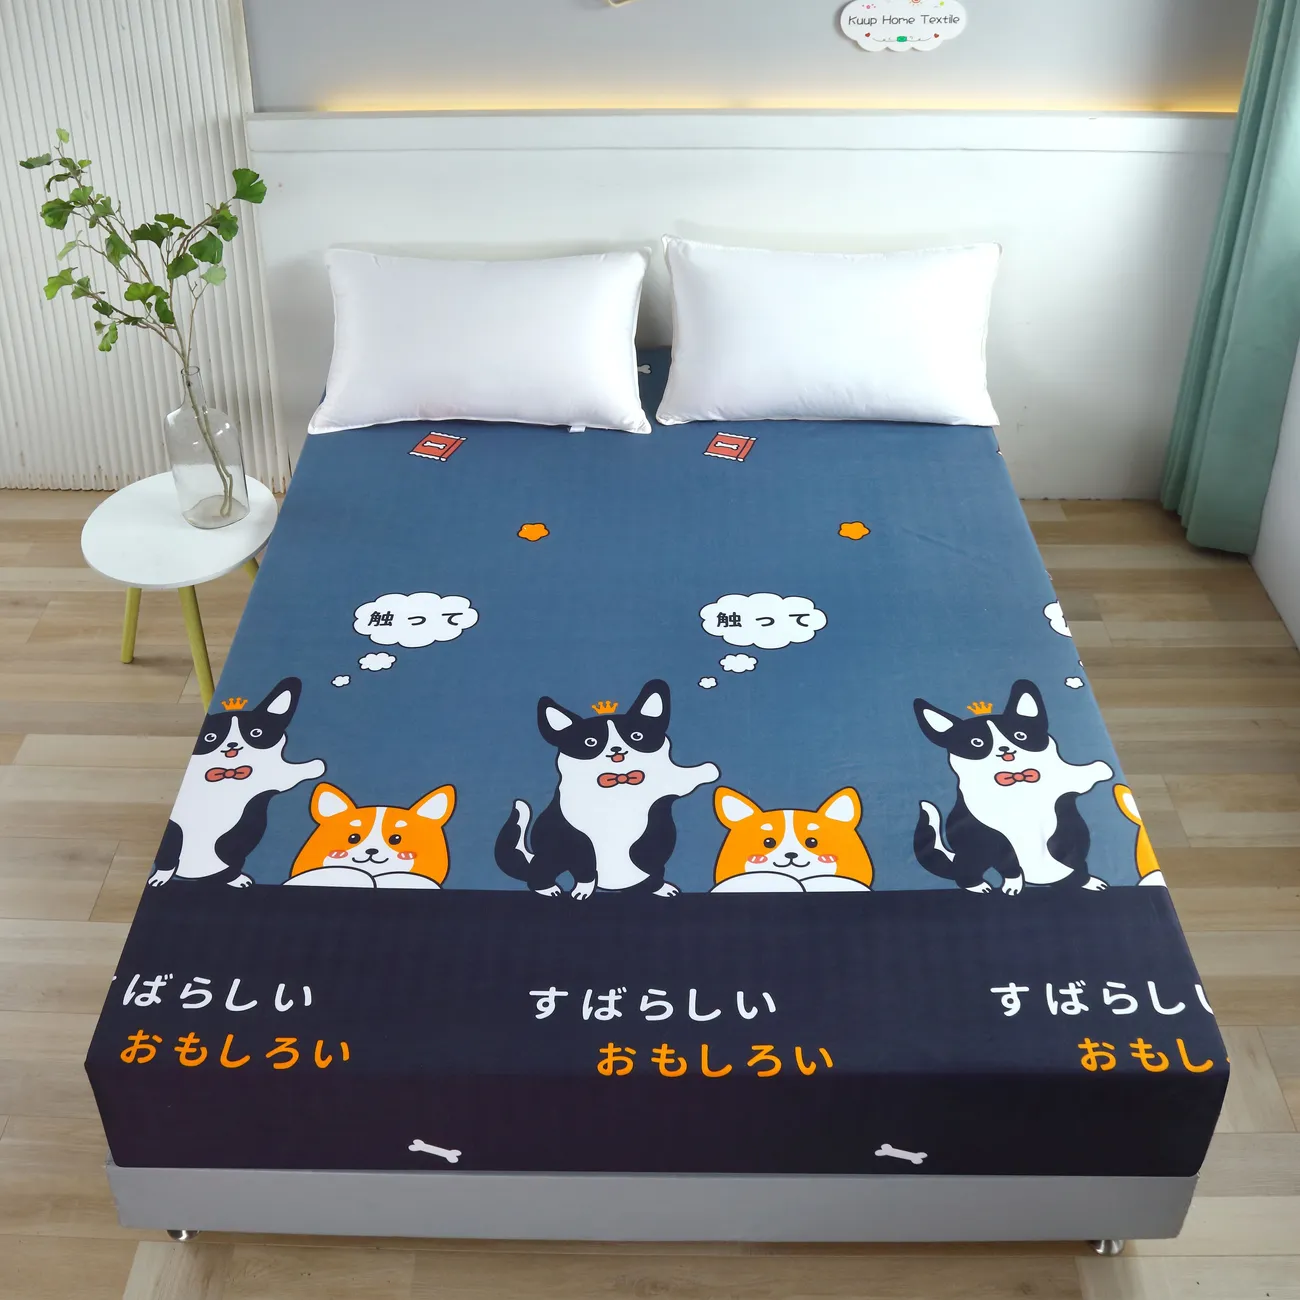 Cartoon Dog Print Fitted Sheet (without Pillowcase), Soft